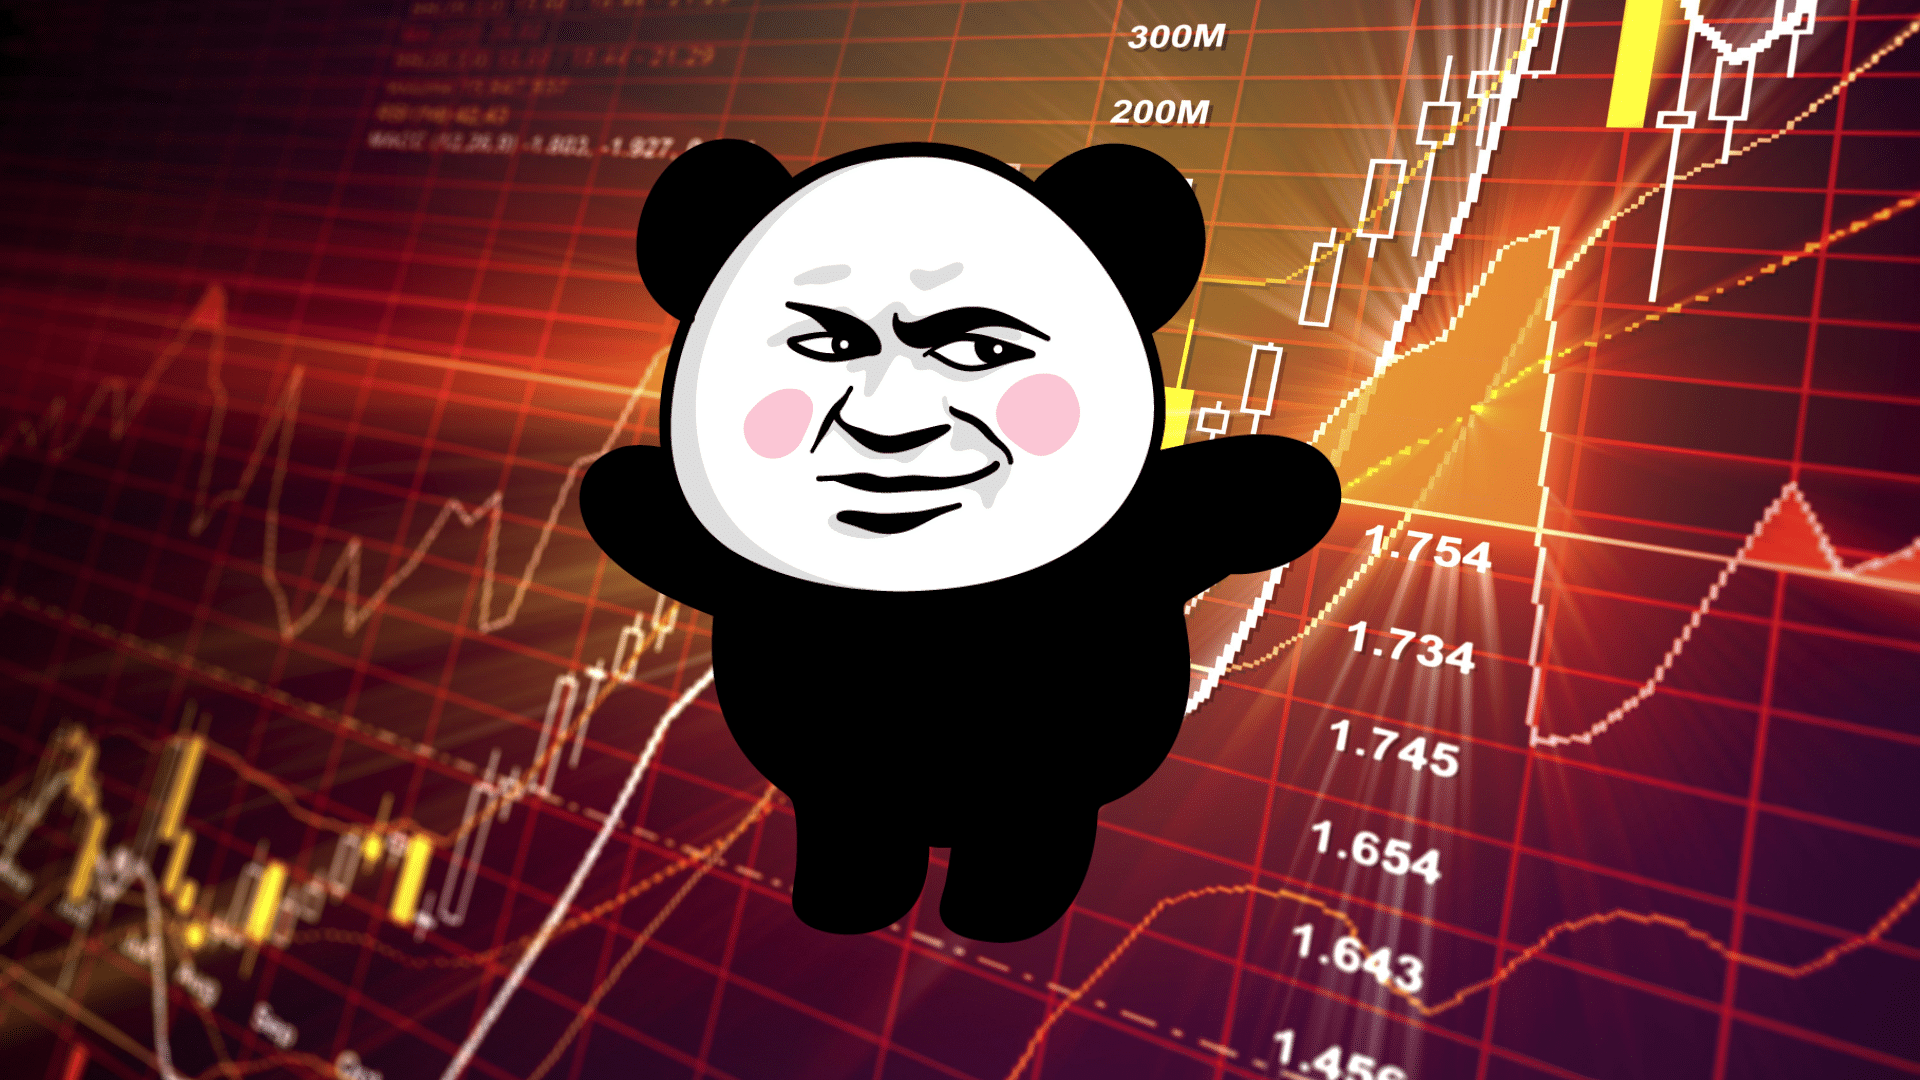 Biaoqing Price Tumbles 18% As Traders Race To Buy This Solana Meme Coin Before Its Big Airdrop And Listing